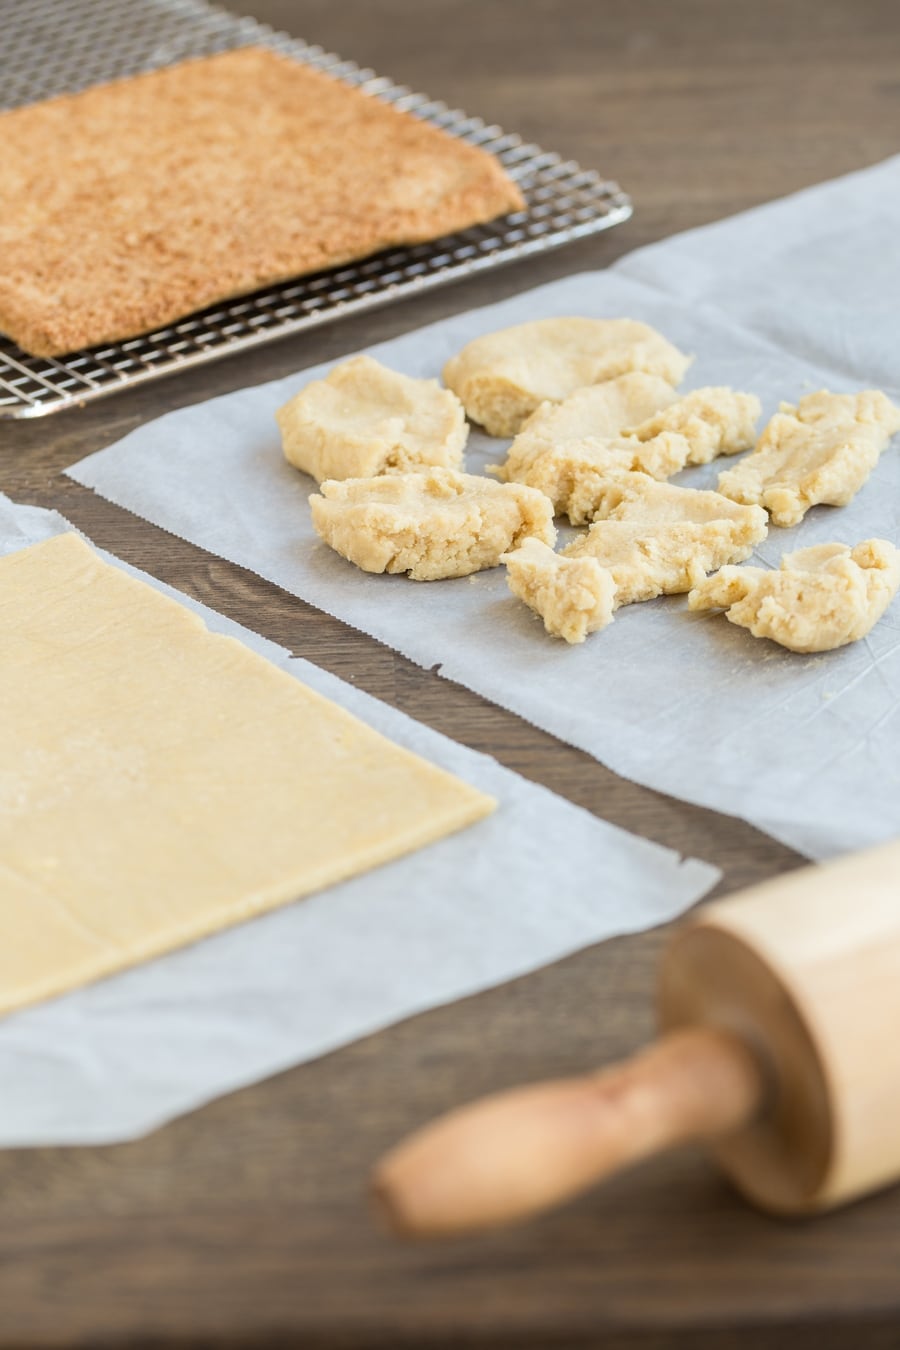 Crumbled pastry dough about to be rolled out between parchment paper sheets.